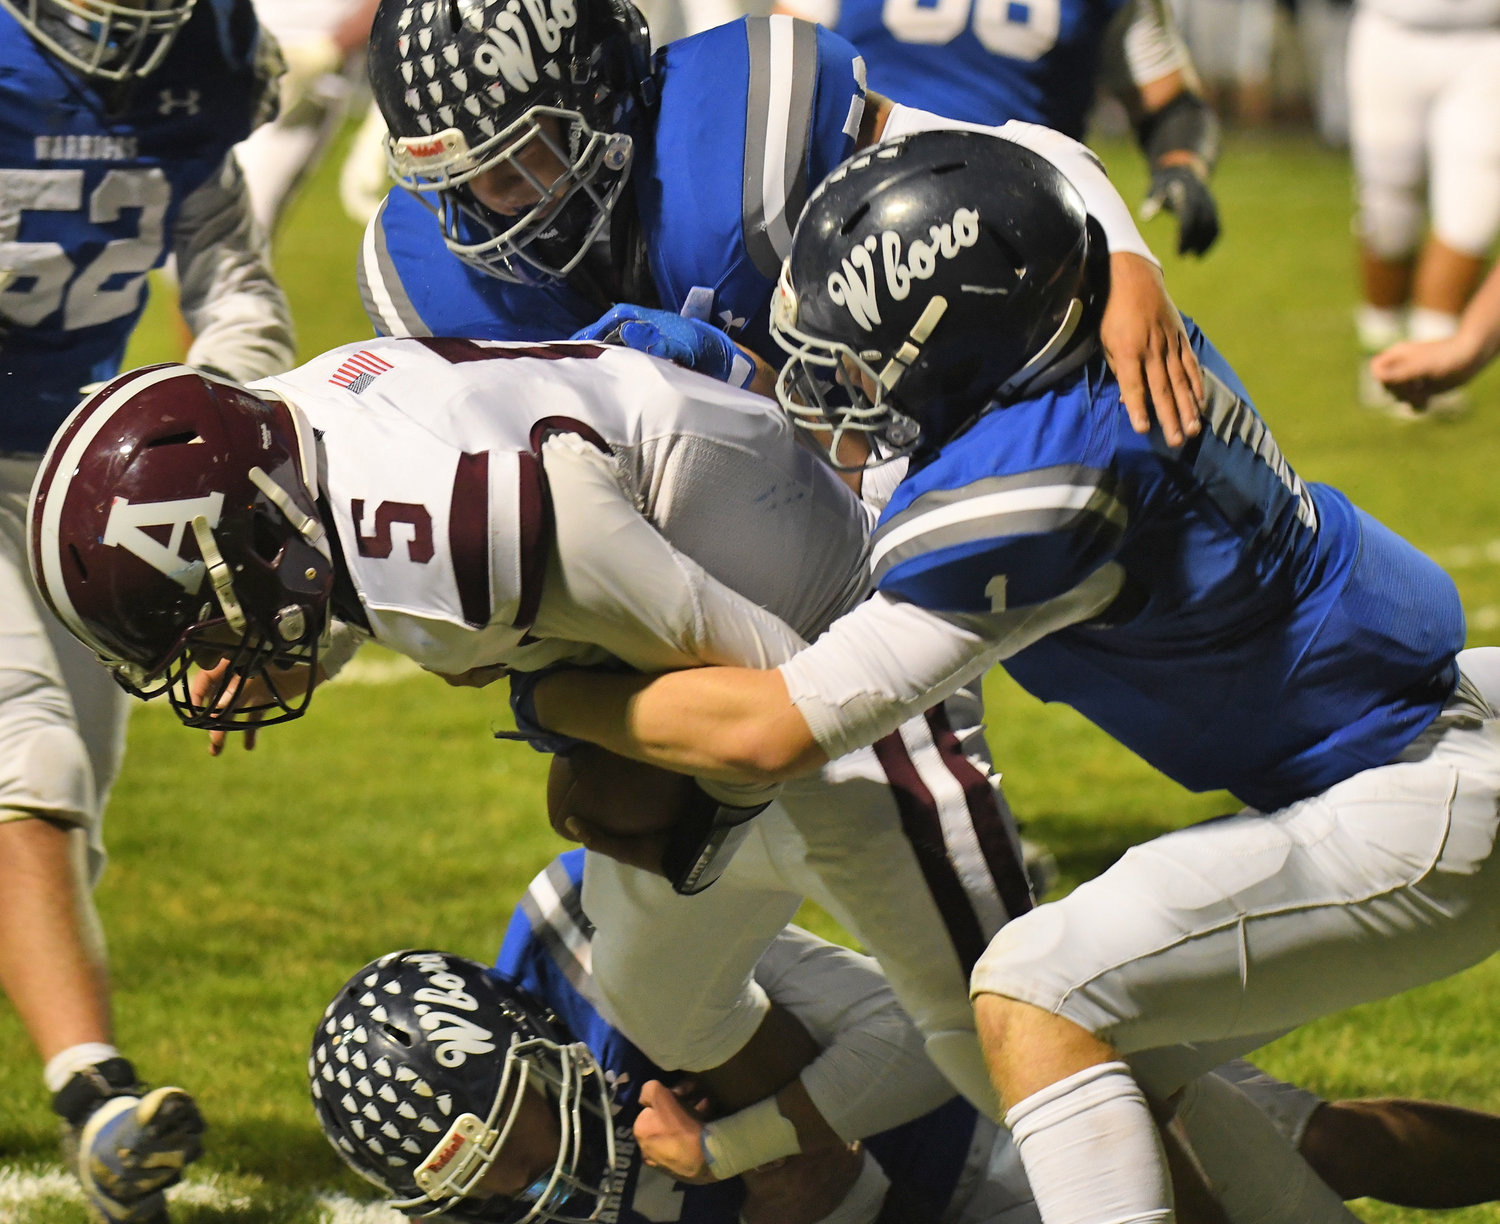 Whitesboro defenders Patrick Wands, right, and Vincent Zajac, top, tackle Auburn quarterback Elijah Scott in the first quarter Friday night in a Section III Class A quarterfinal. The host Warriors won 42-7.